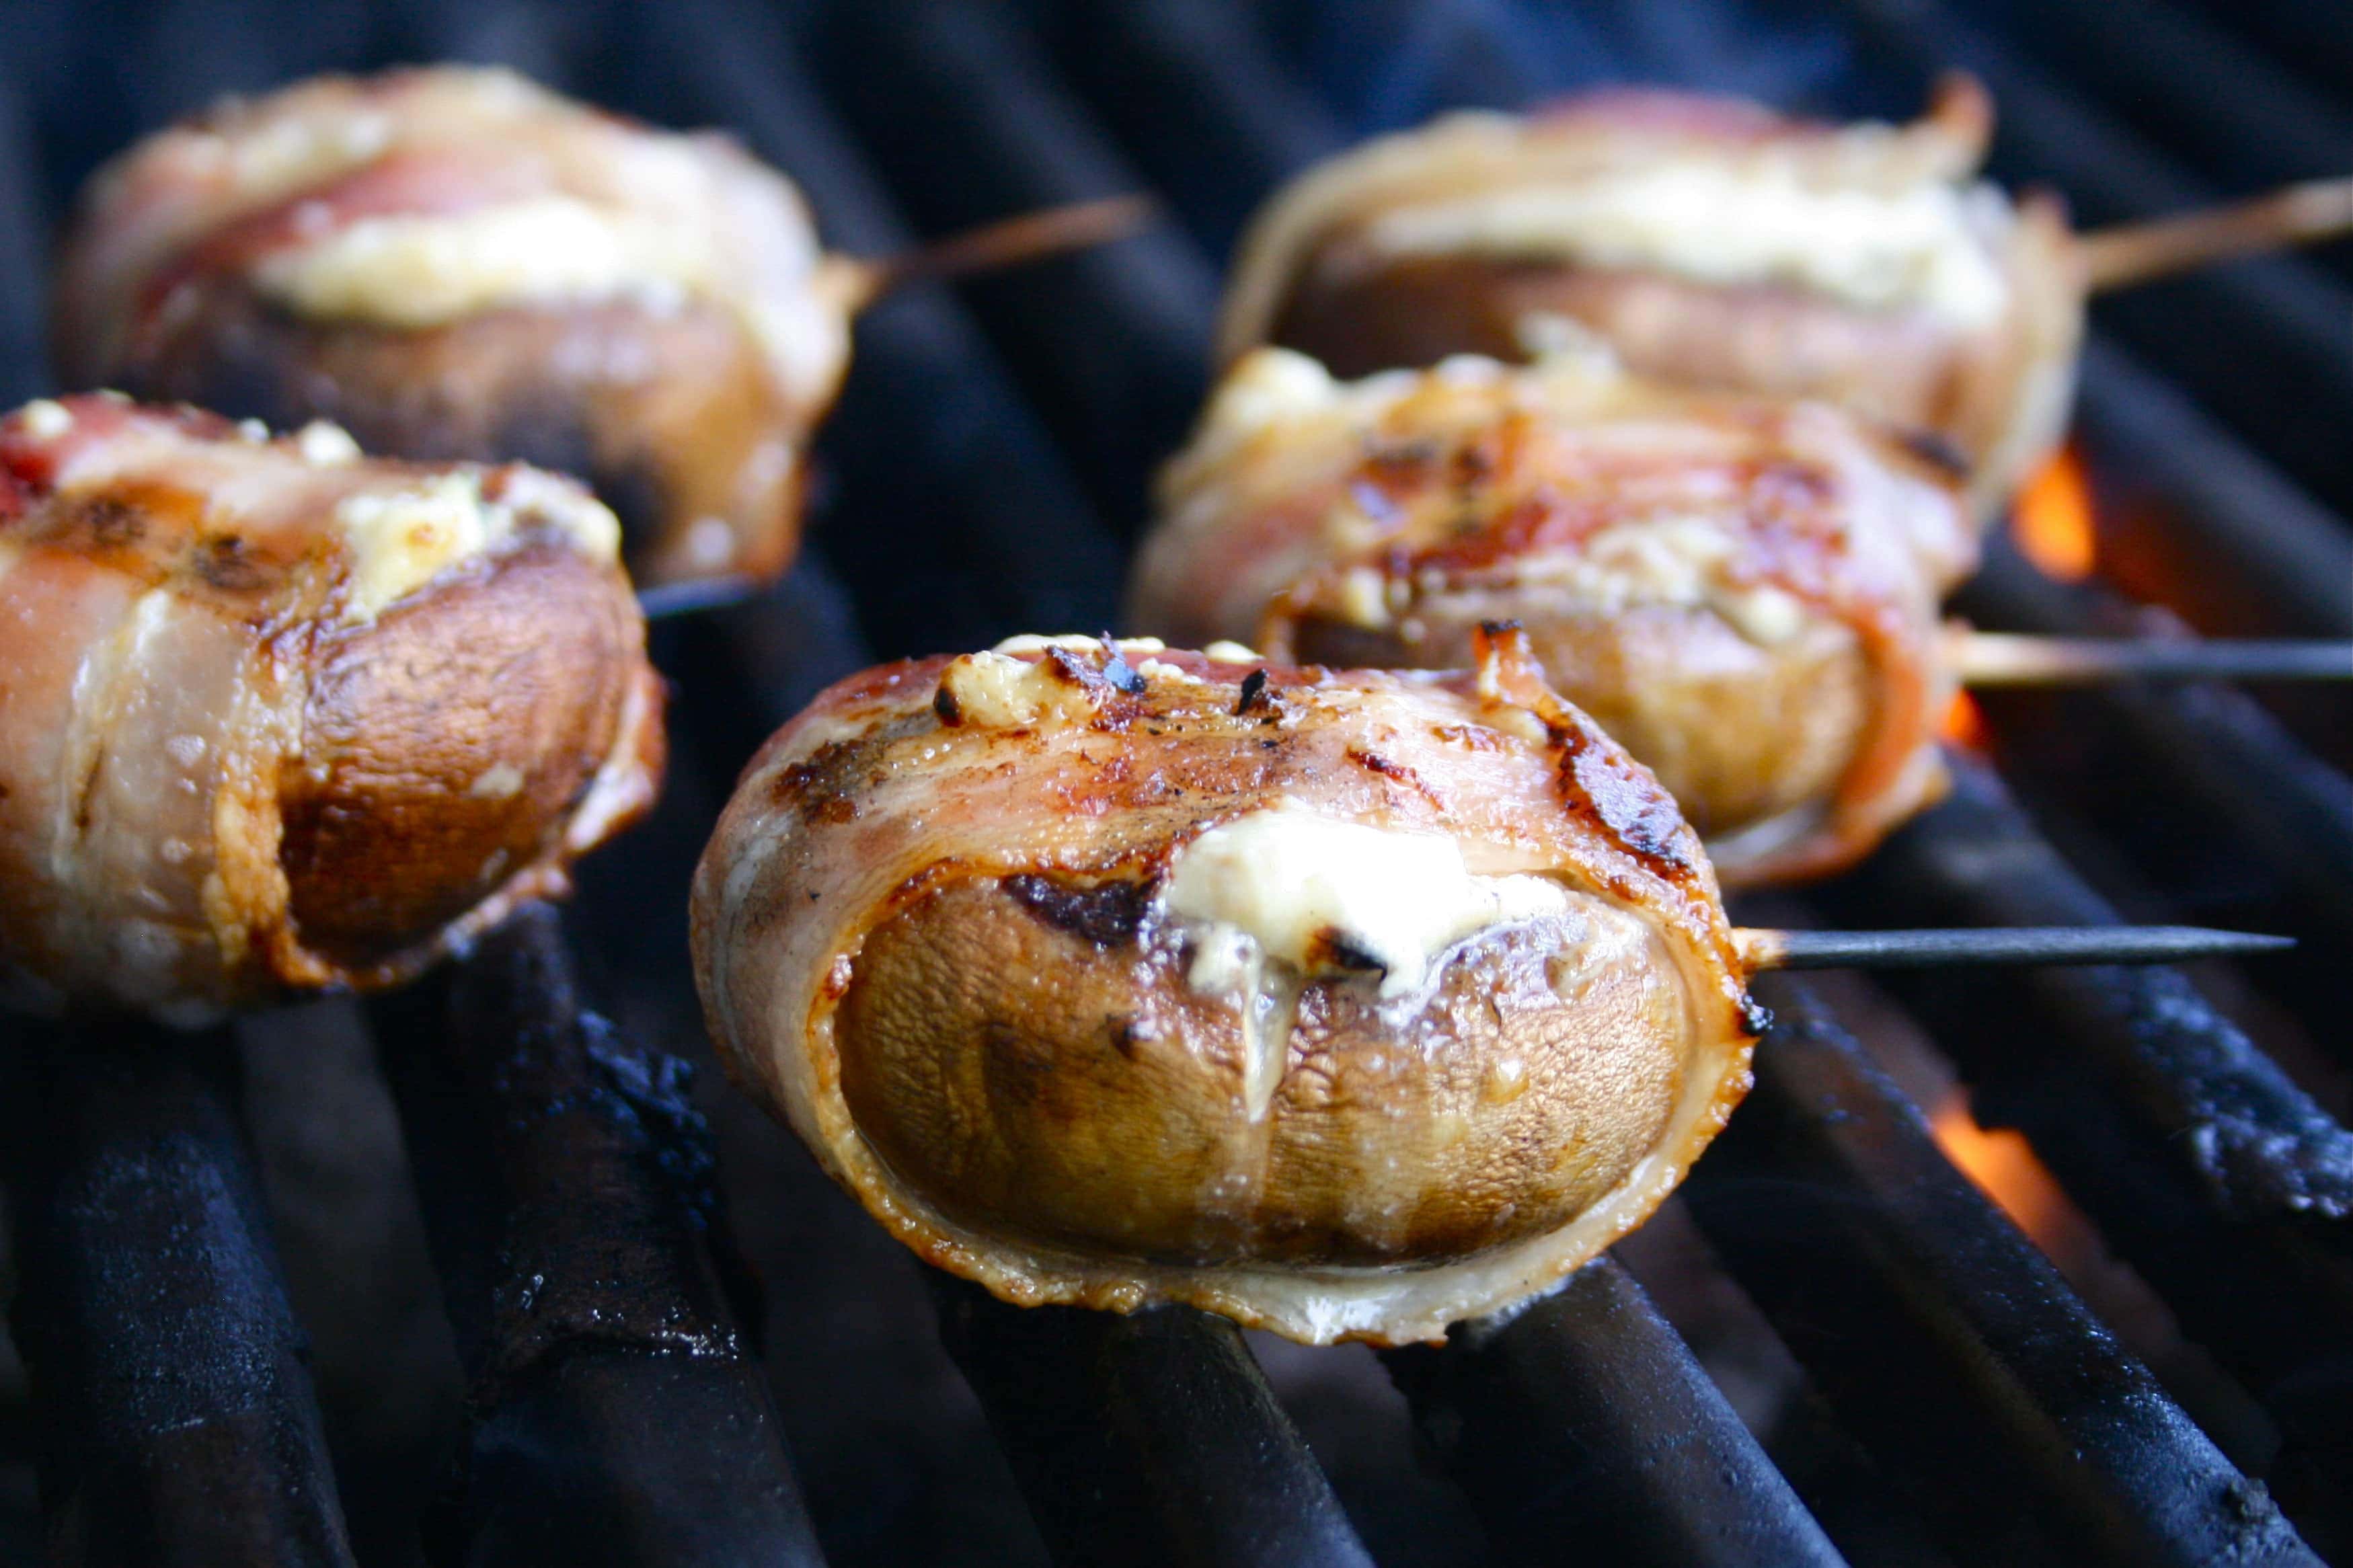 Blue Cheese Filled Bacon-Wrapped Mushrooms | http://homemaderecipes.com/bbq-grill/10-campfire-recipes/